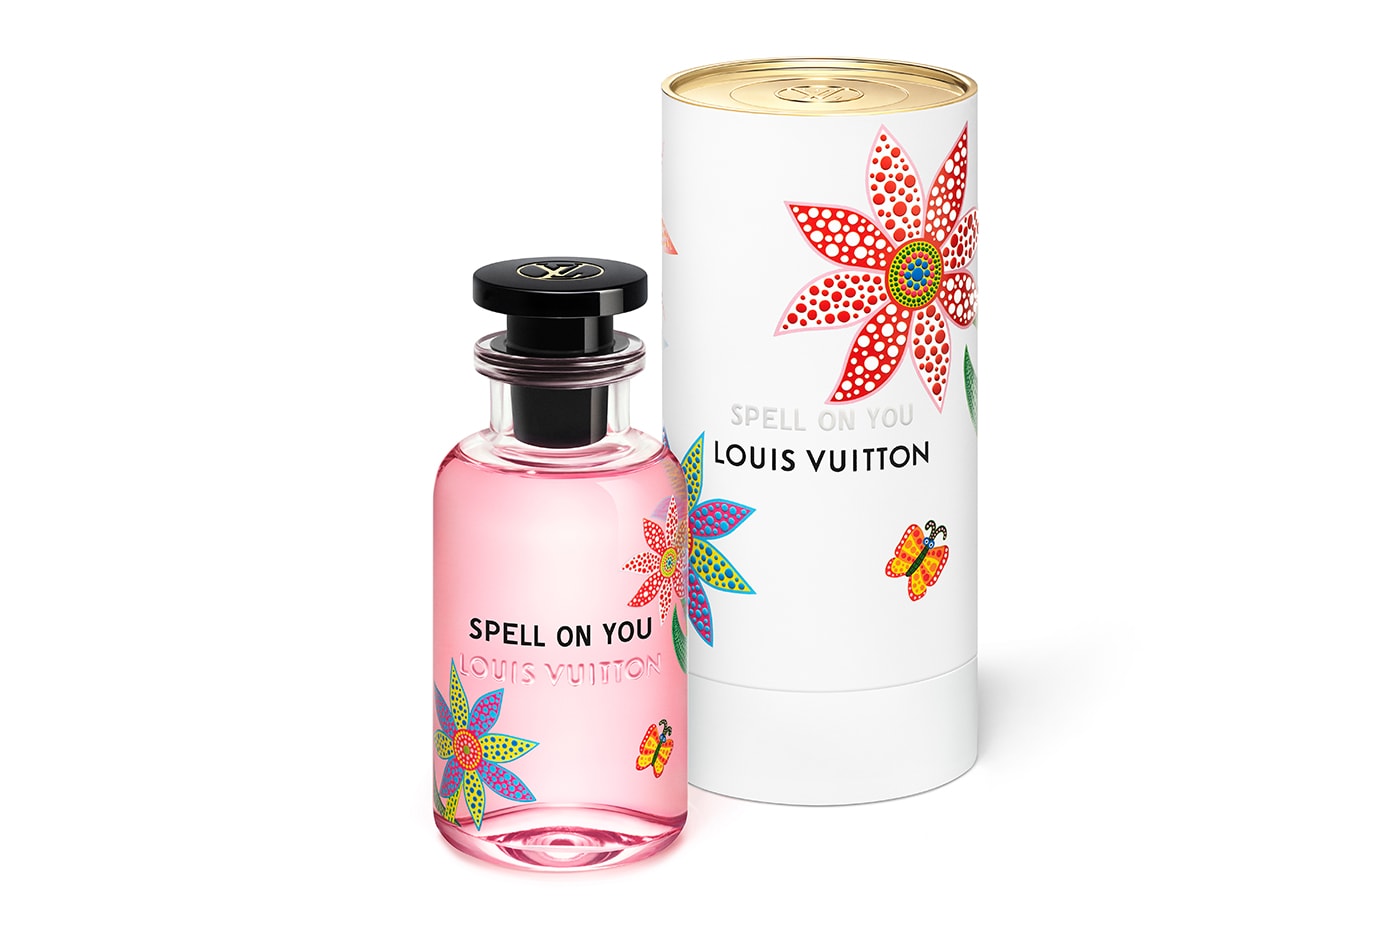 A Guide To The Louis Vuitton Fragrance Collection in 2023  Louis vuitton  fragrance, Vuitton fragrance, Fragrance collection